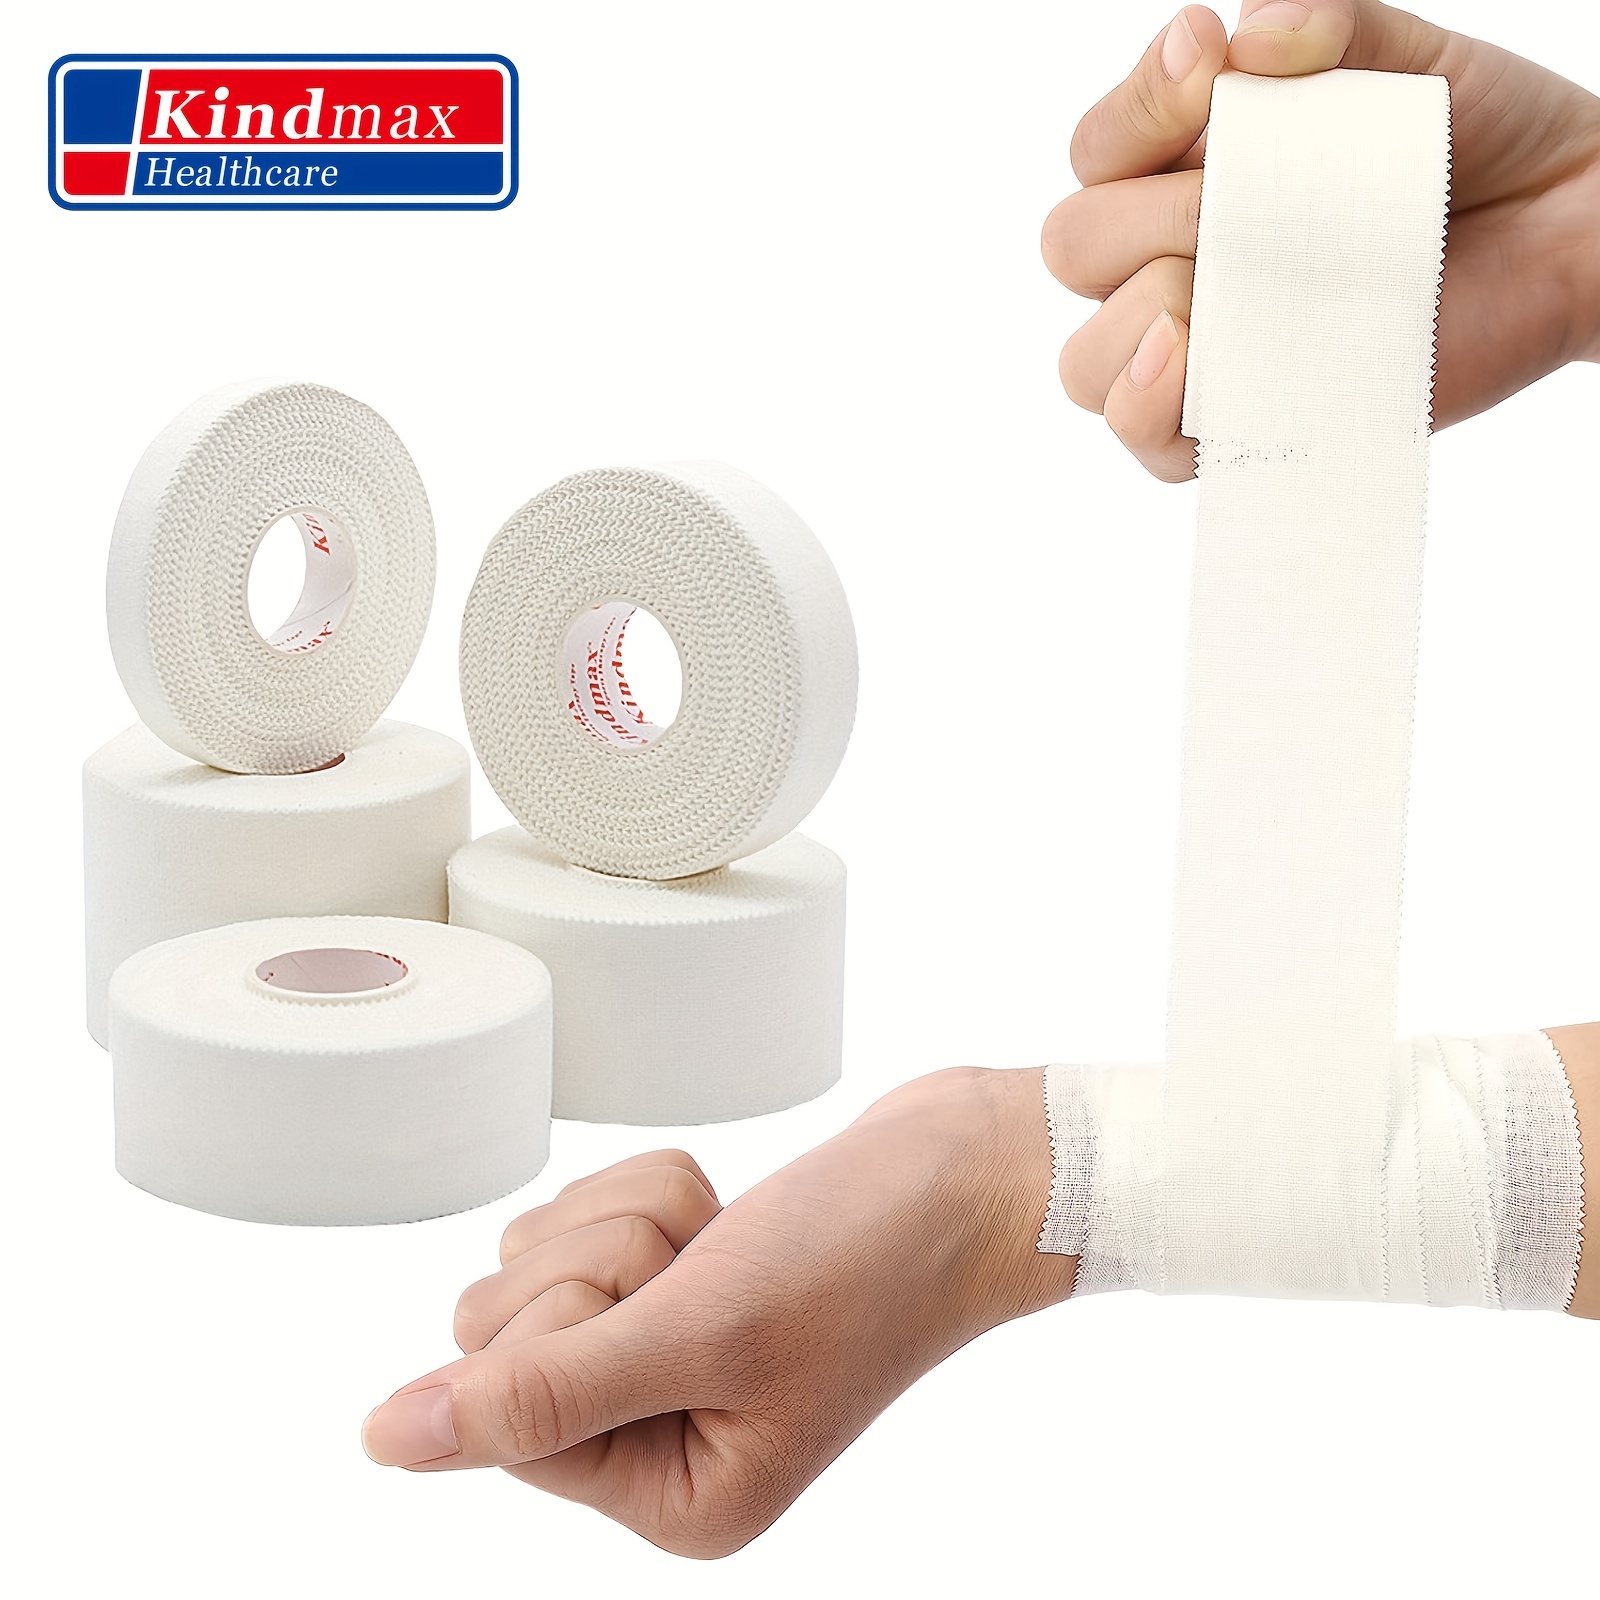 Sport Tape Muscle Bandage Self Adhesive Wrap Kinesiology Tape For Wrist  Ankle